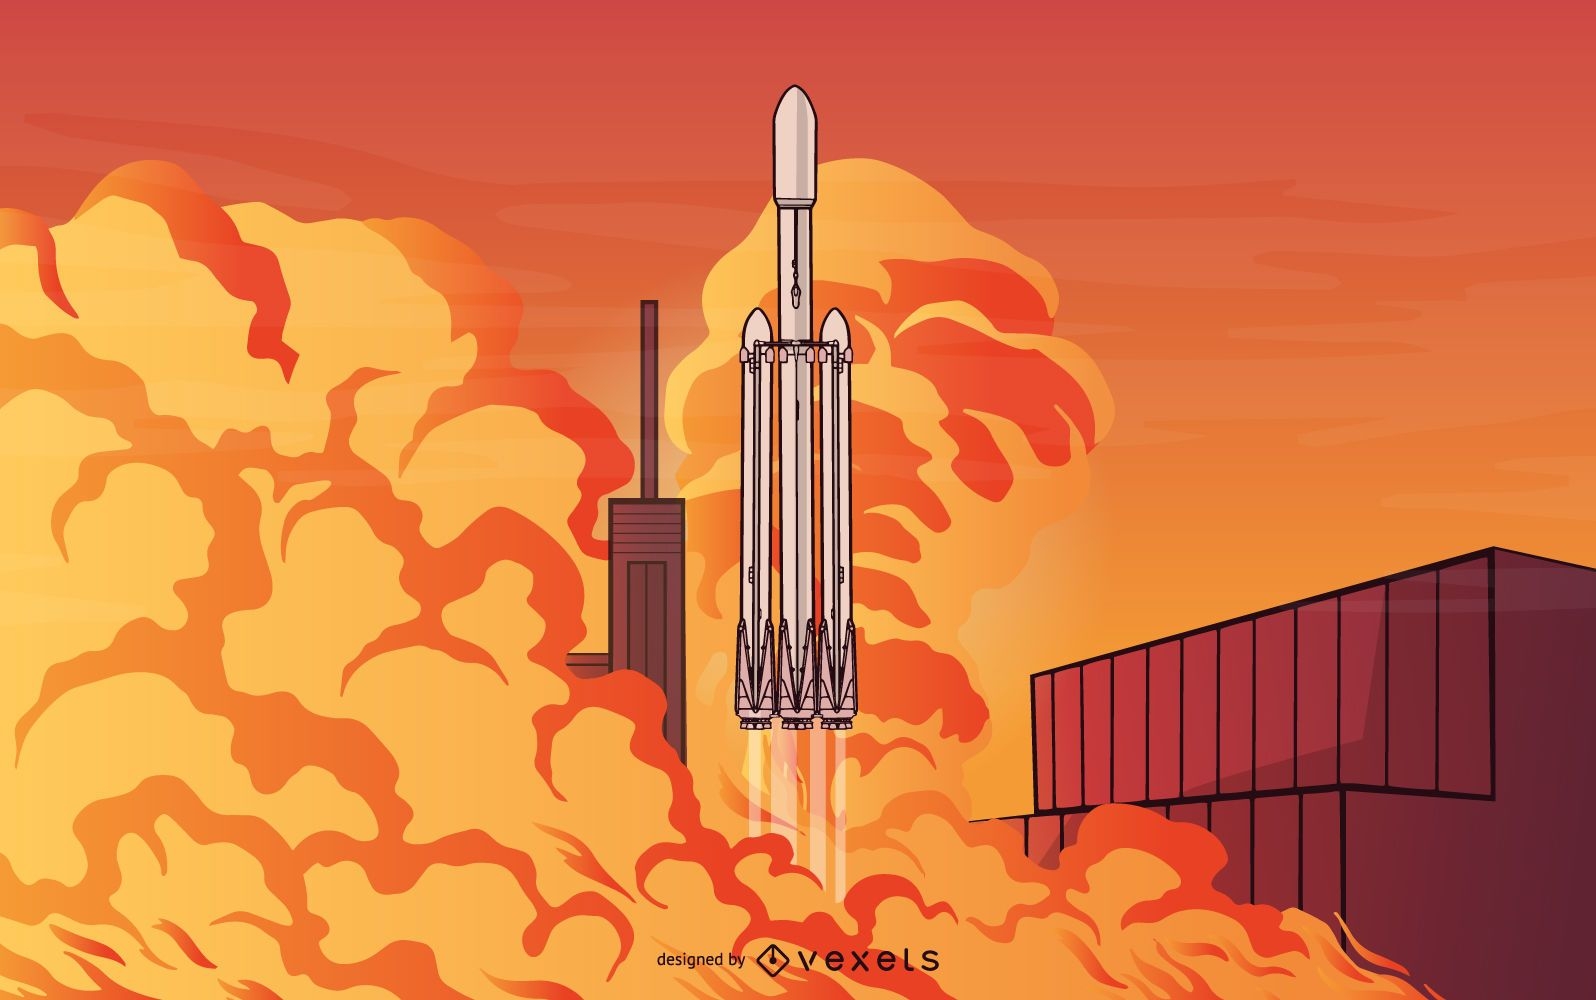 SpaceX Falcon Rocket Launch Illustration